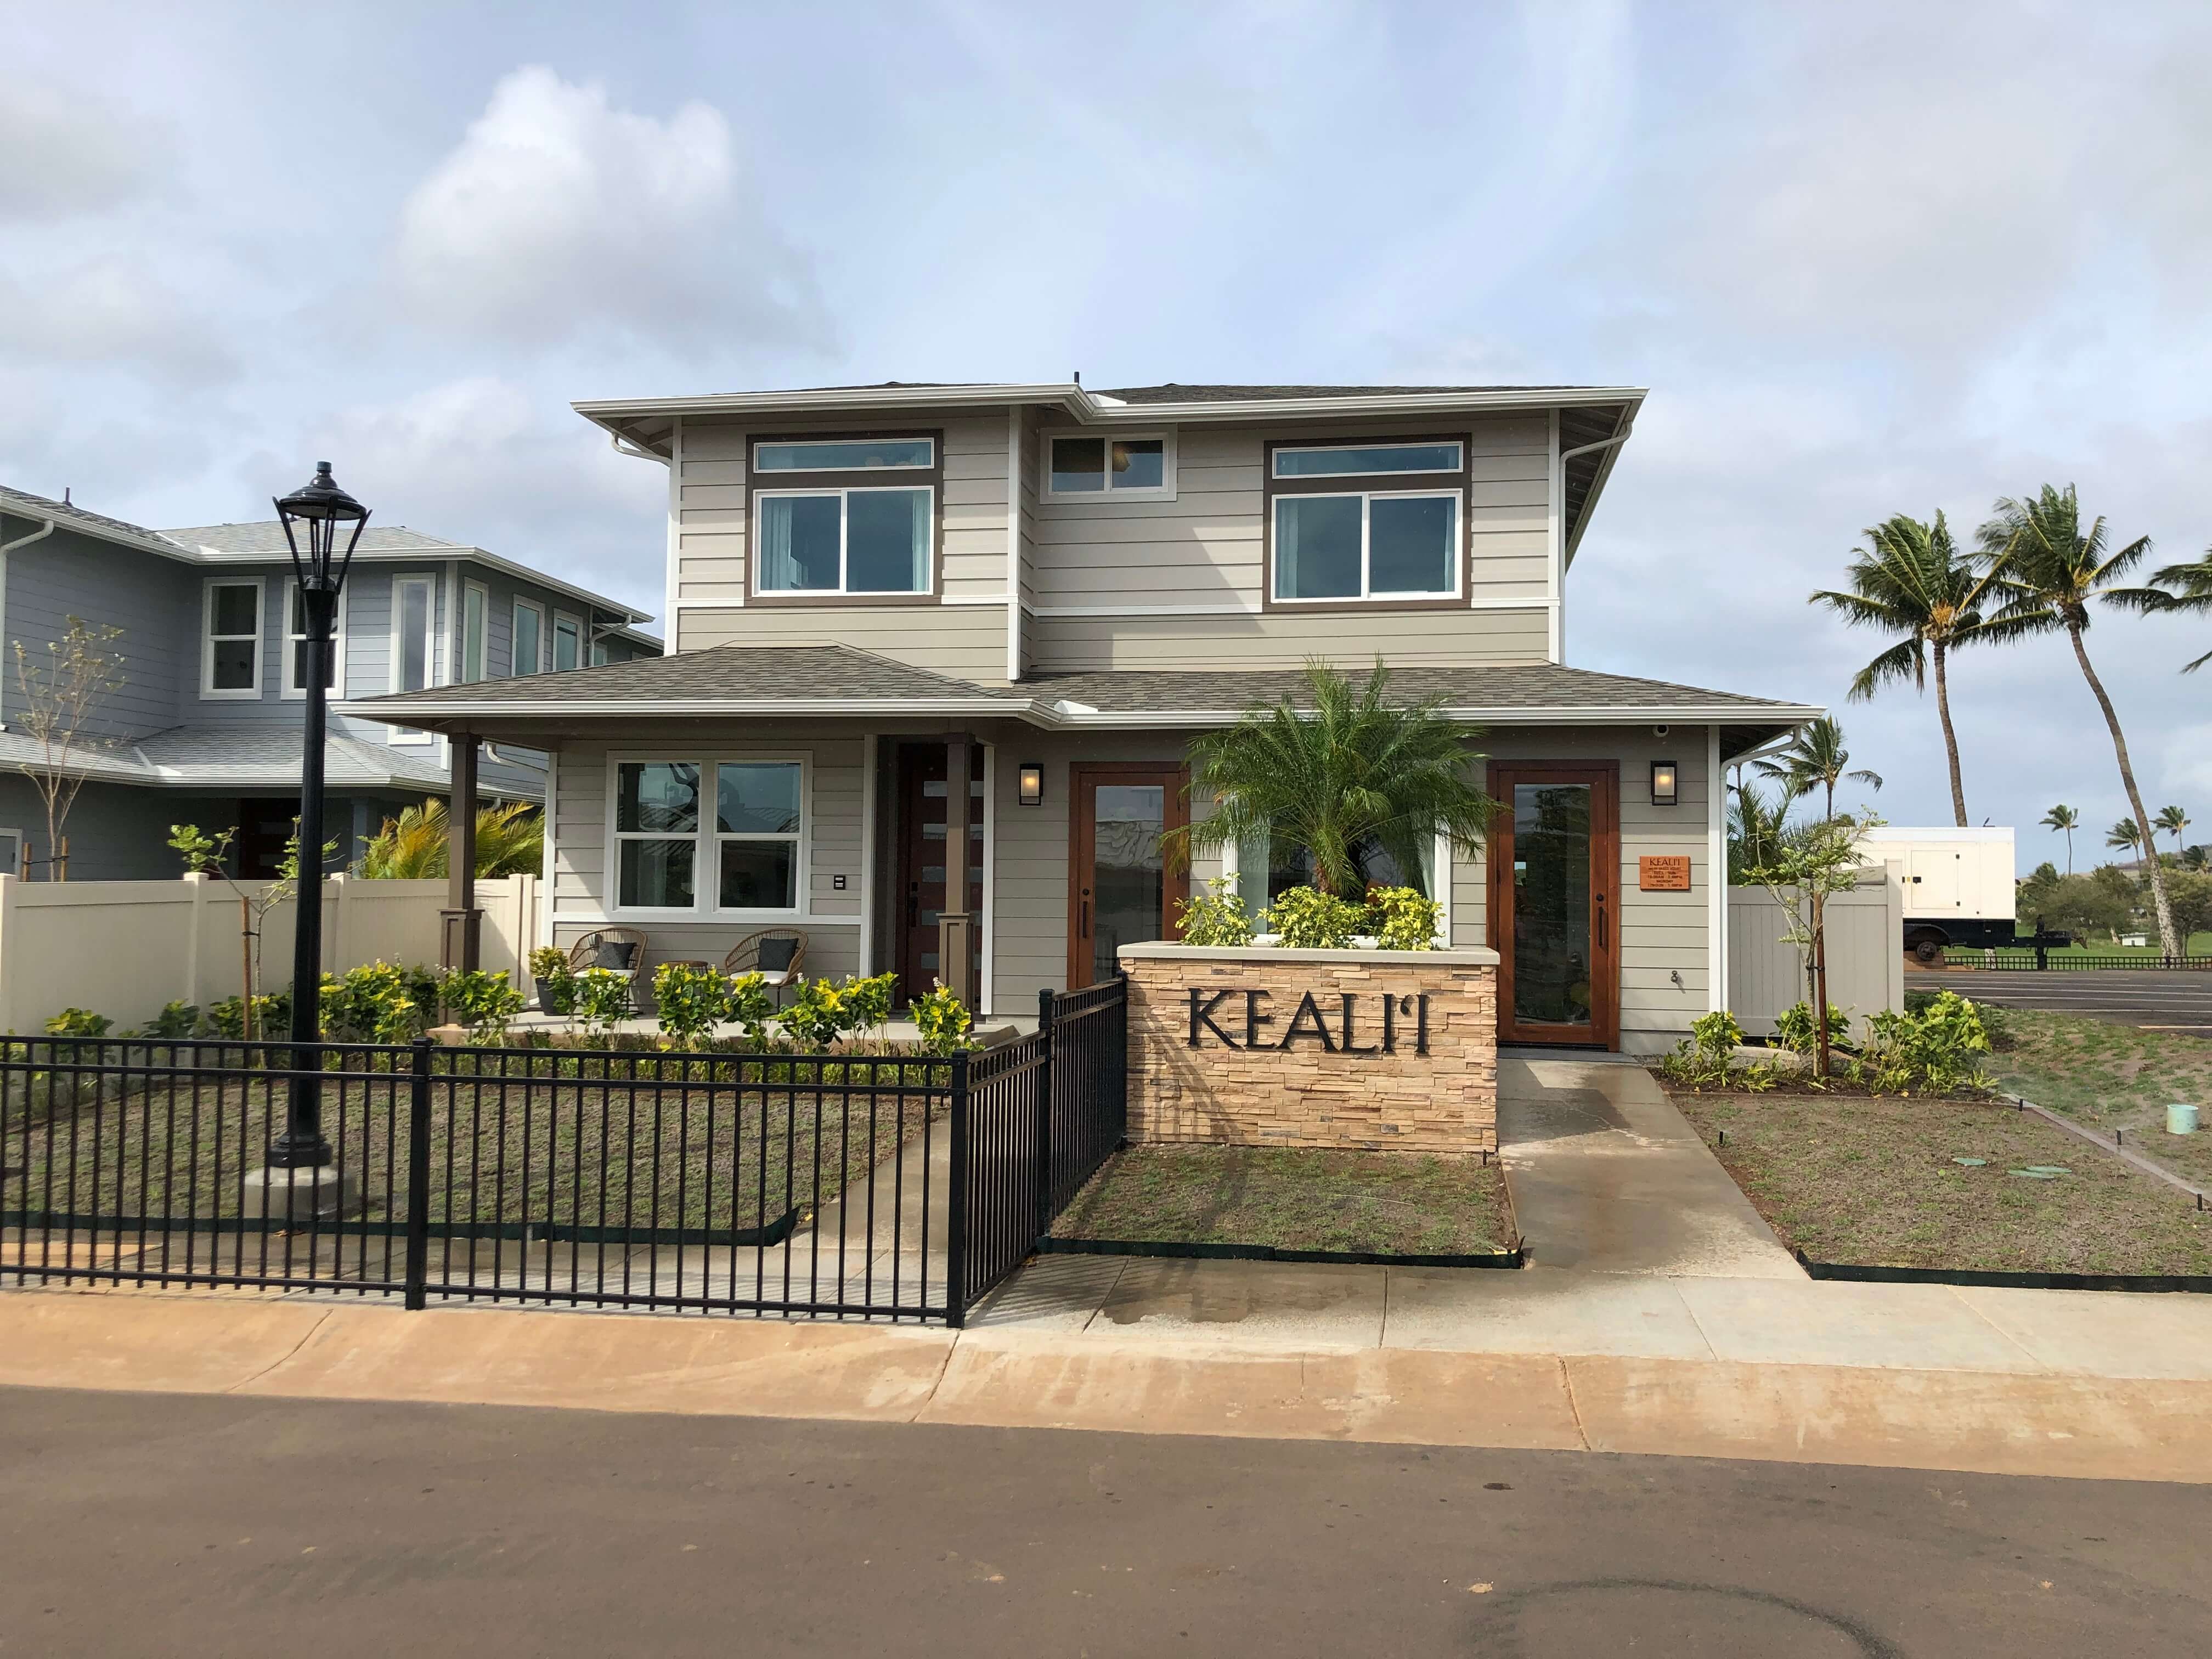 kealii by gentry model home